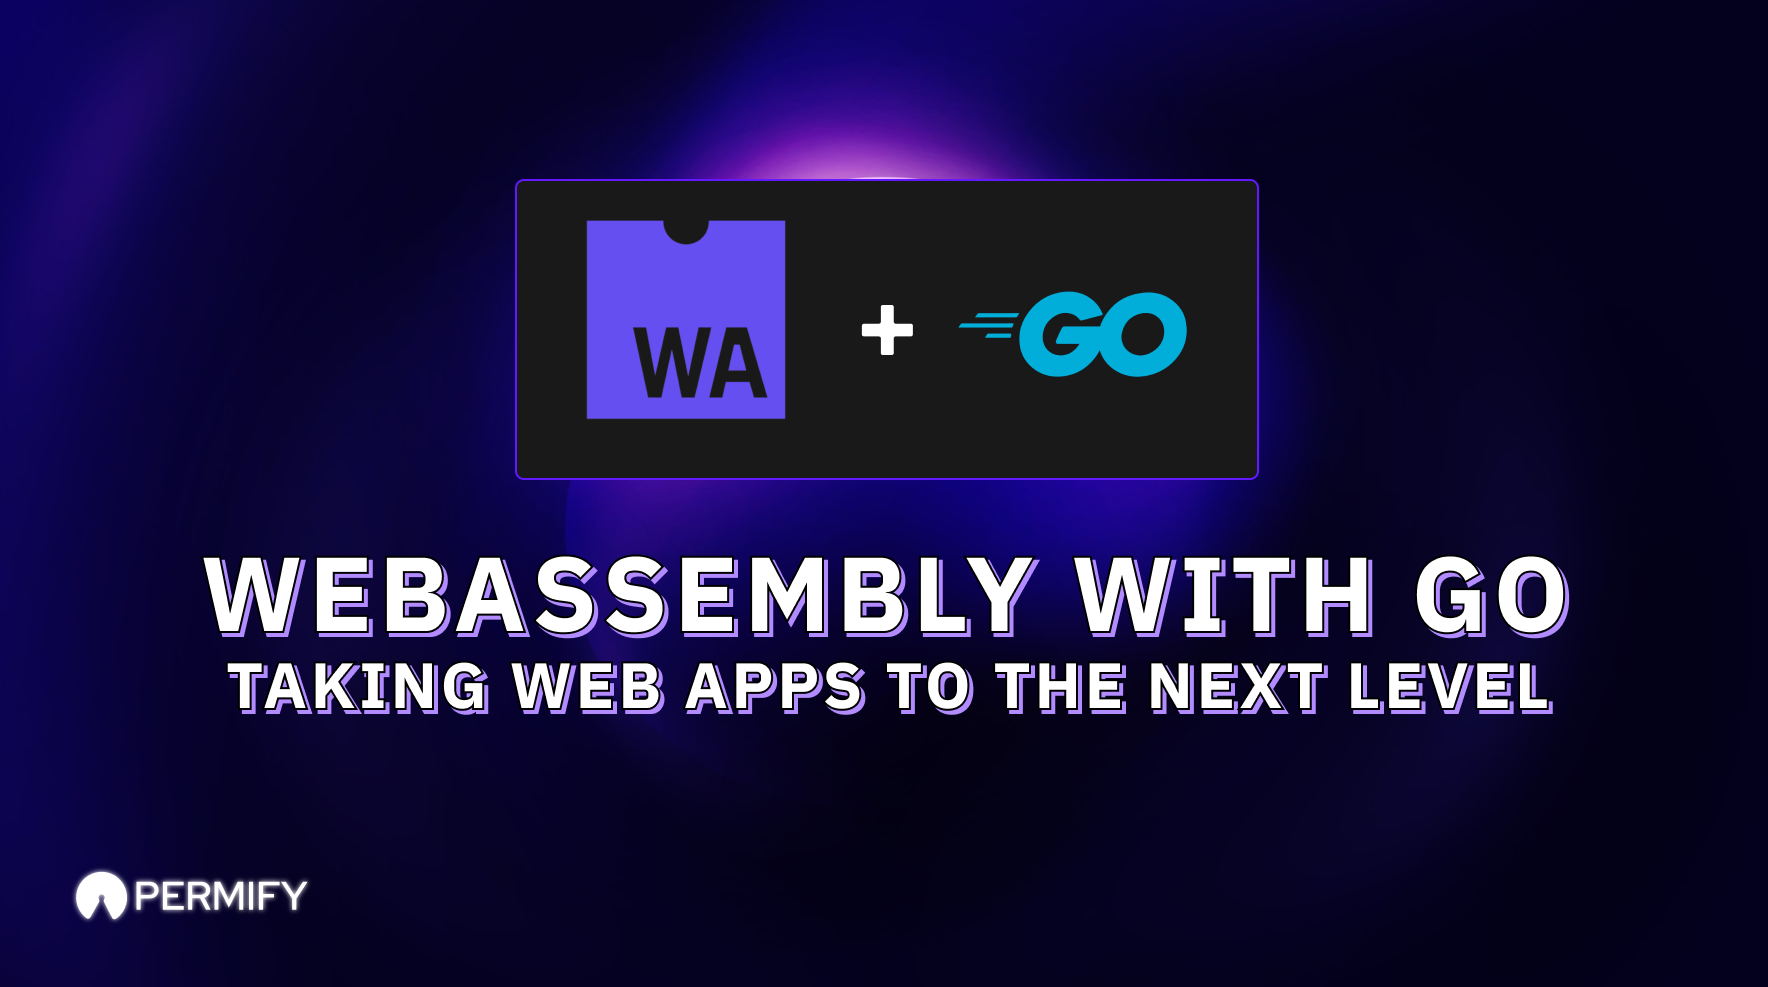 WebAssembly with Go: Taking Web Apps to the Next Level